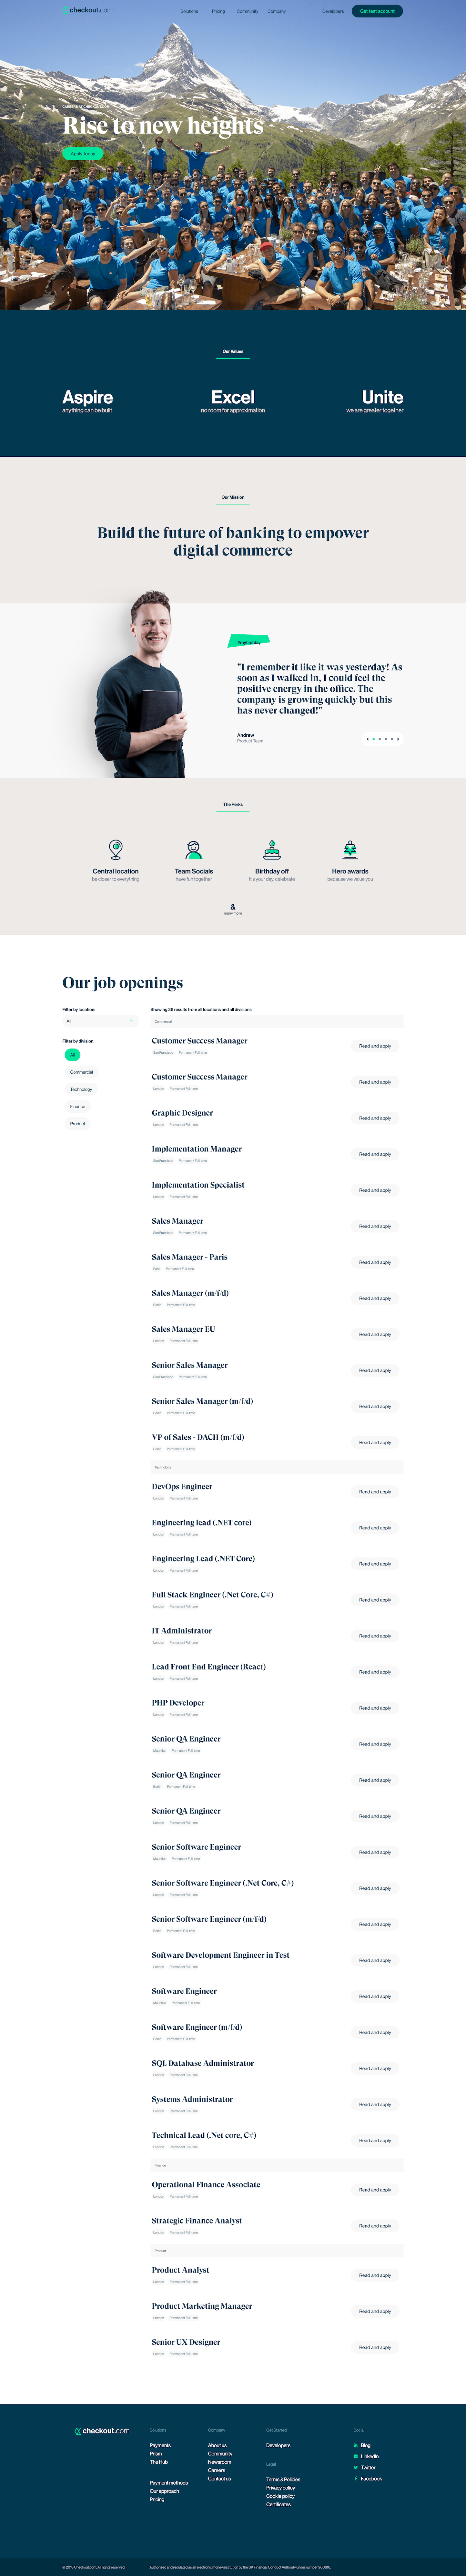 Screenshot of the Careers page from the Checkout website.